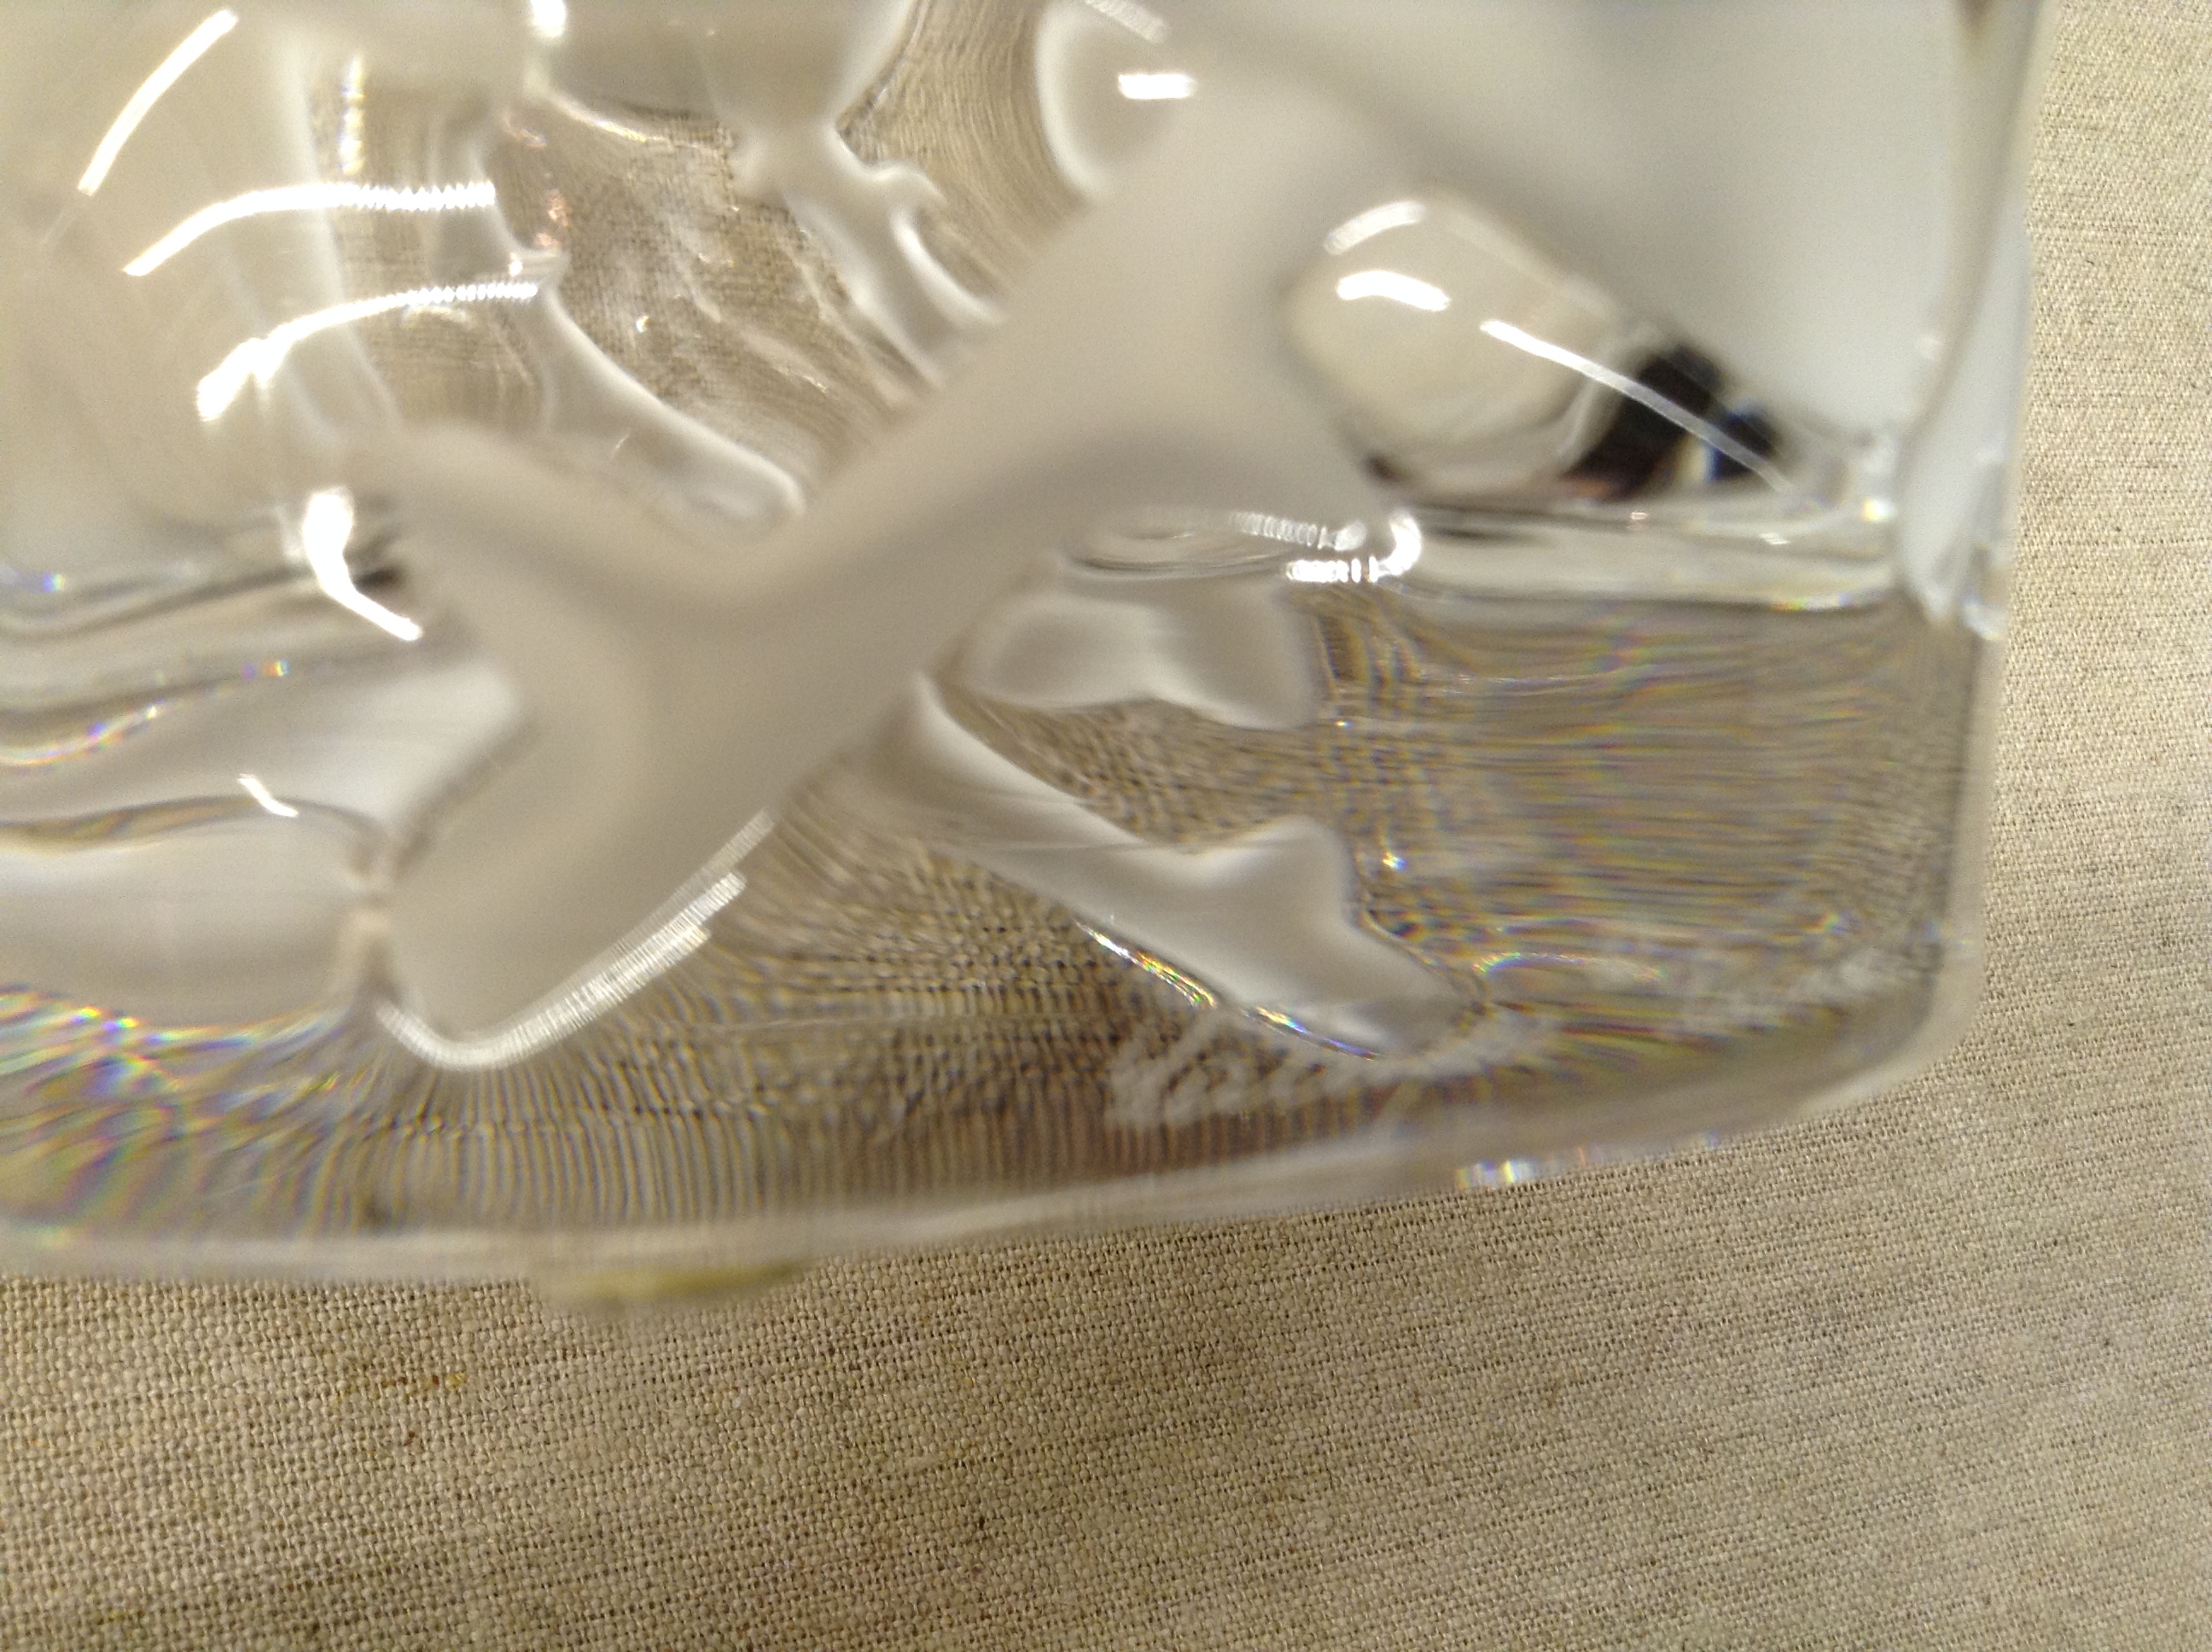 A 20TH CENTURY LALIQUE GLASS VASE Clear glass decorated with frosted glass Ispahan roses, detail - Image 2 of 2